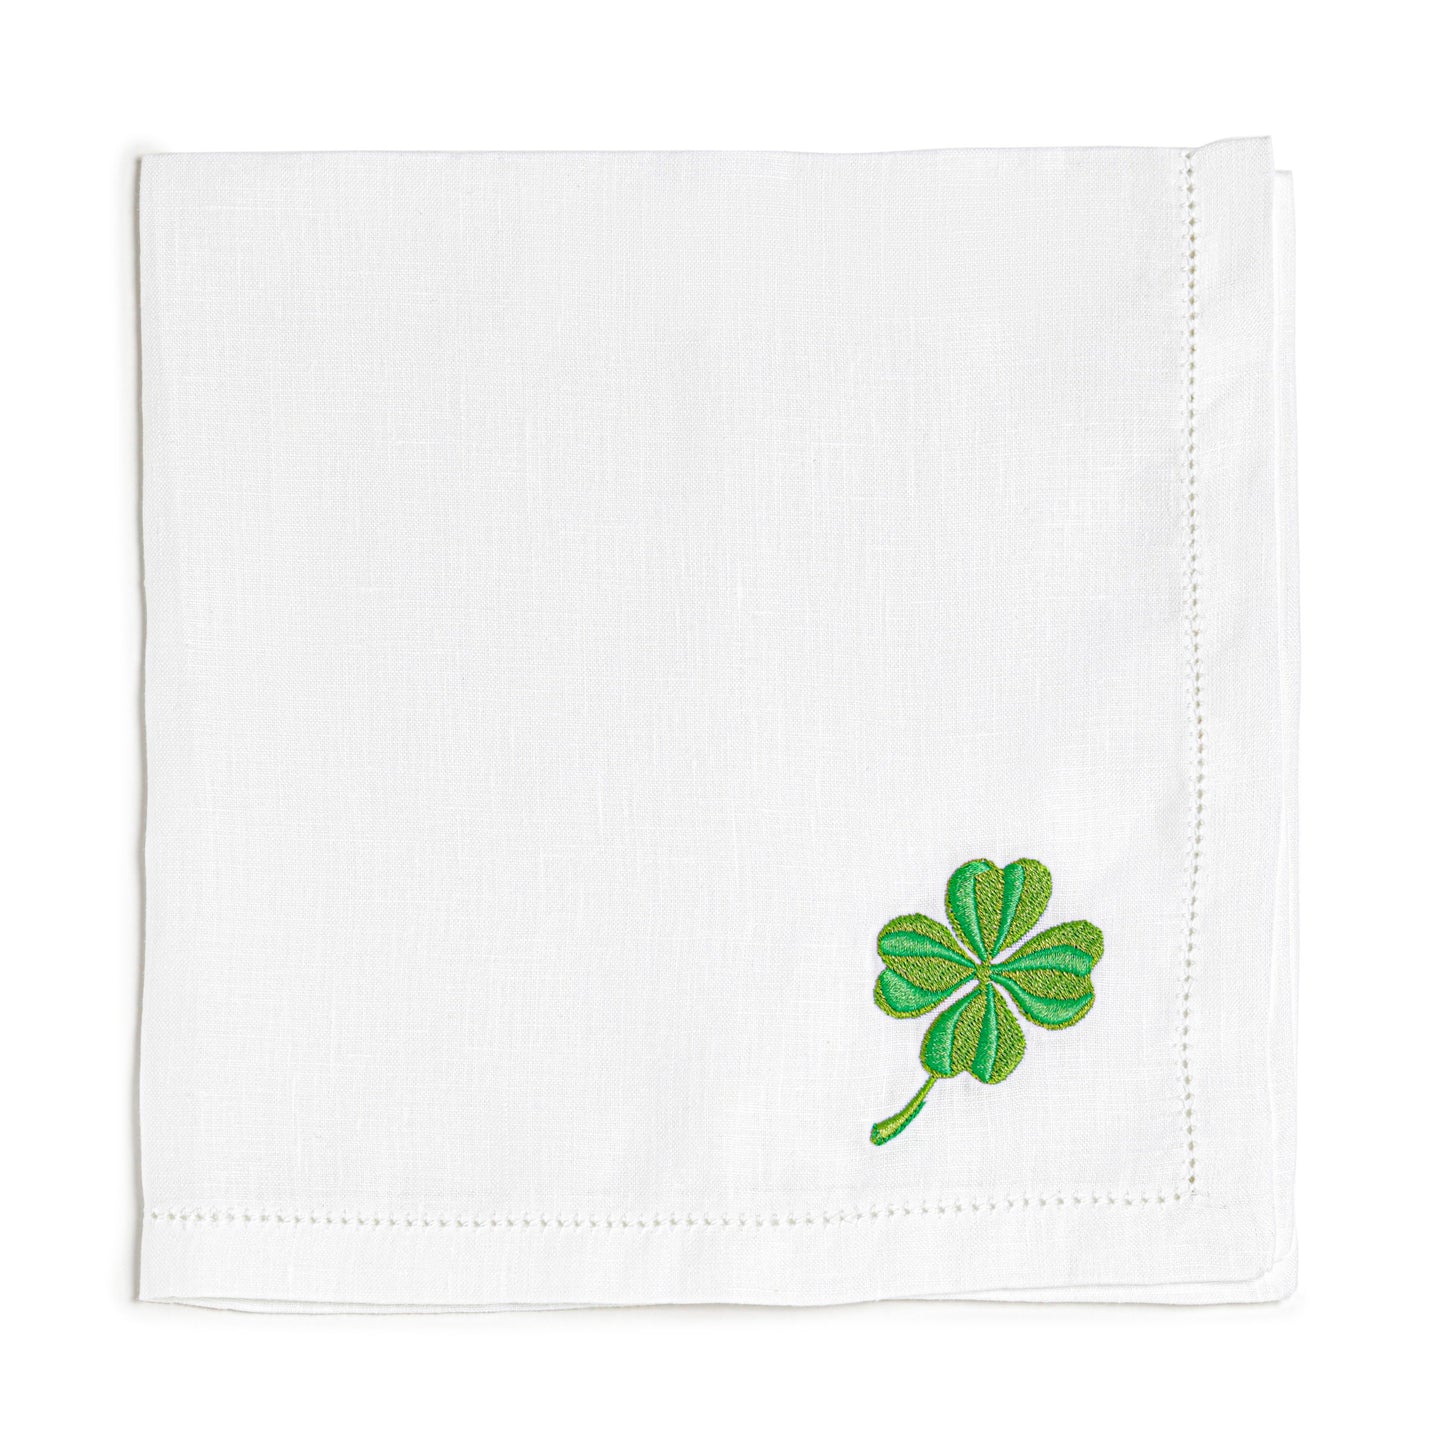 Embroidered linen napkin | CHANCE